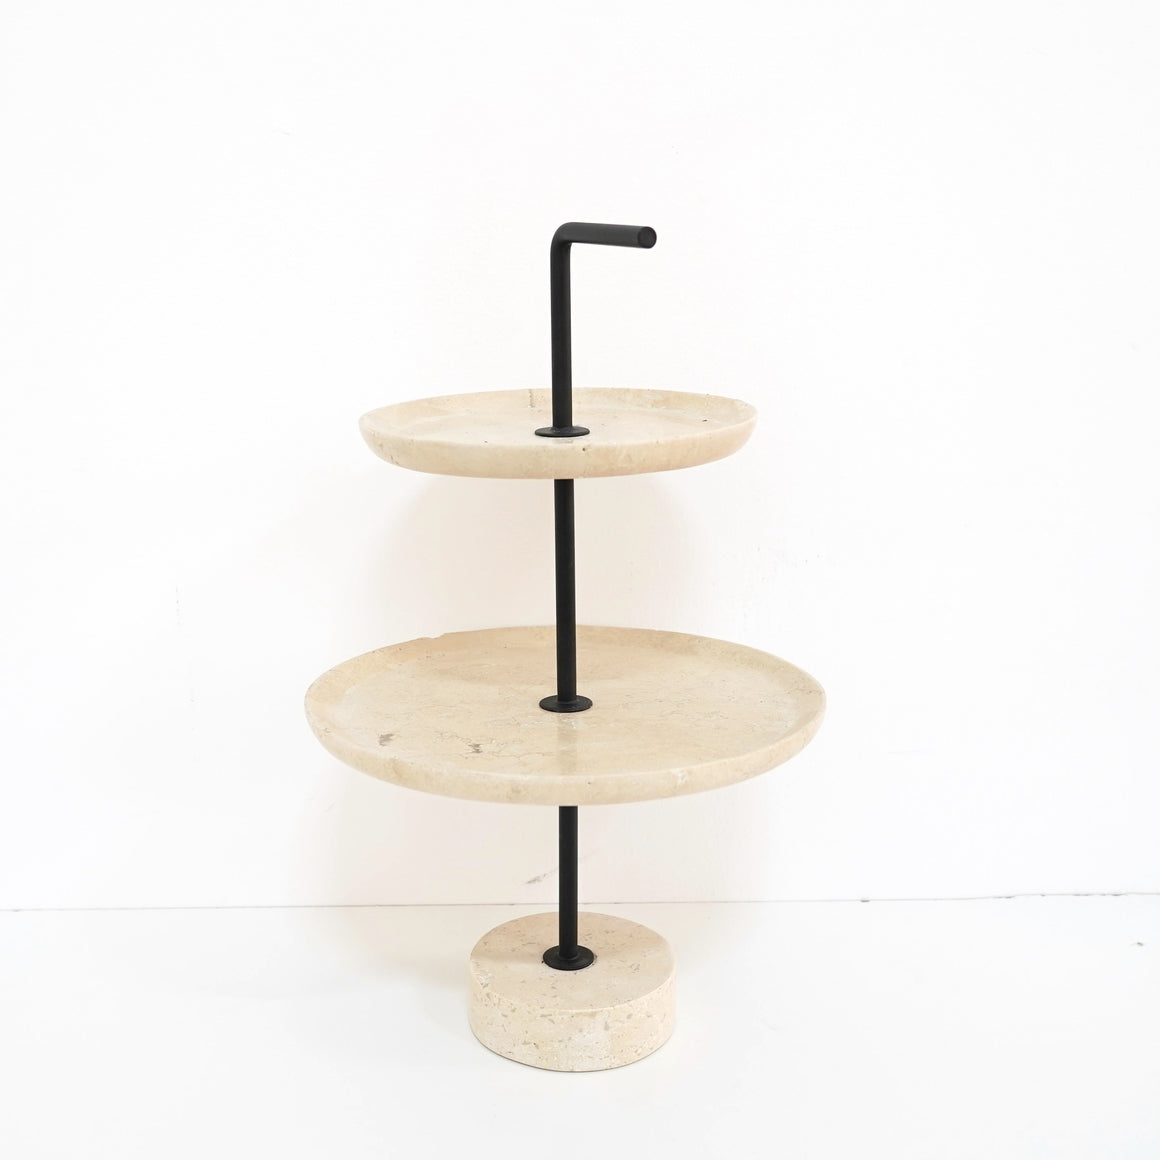 Zoe Collection - Alice Cake Stand